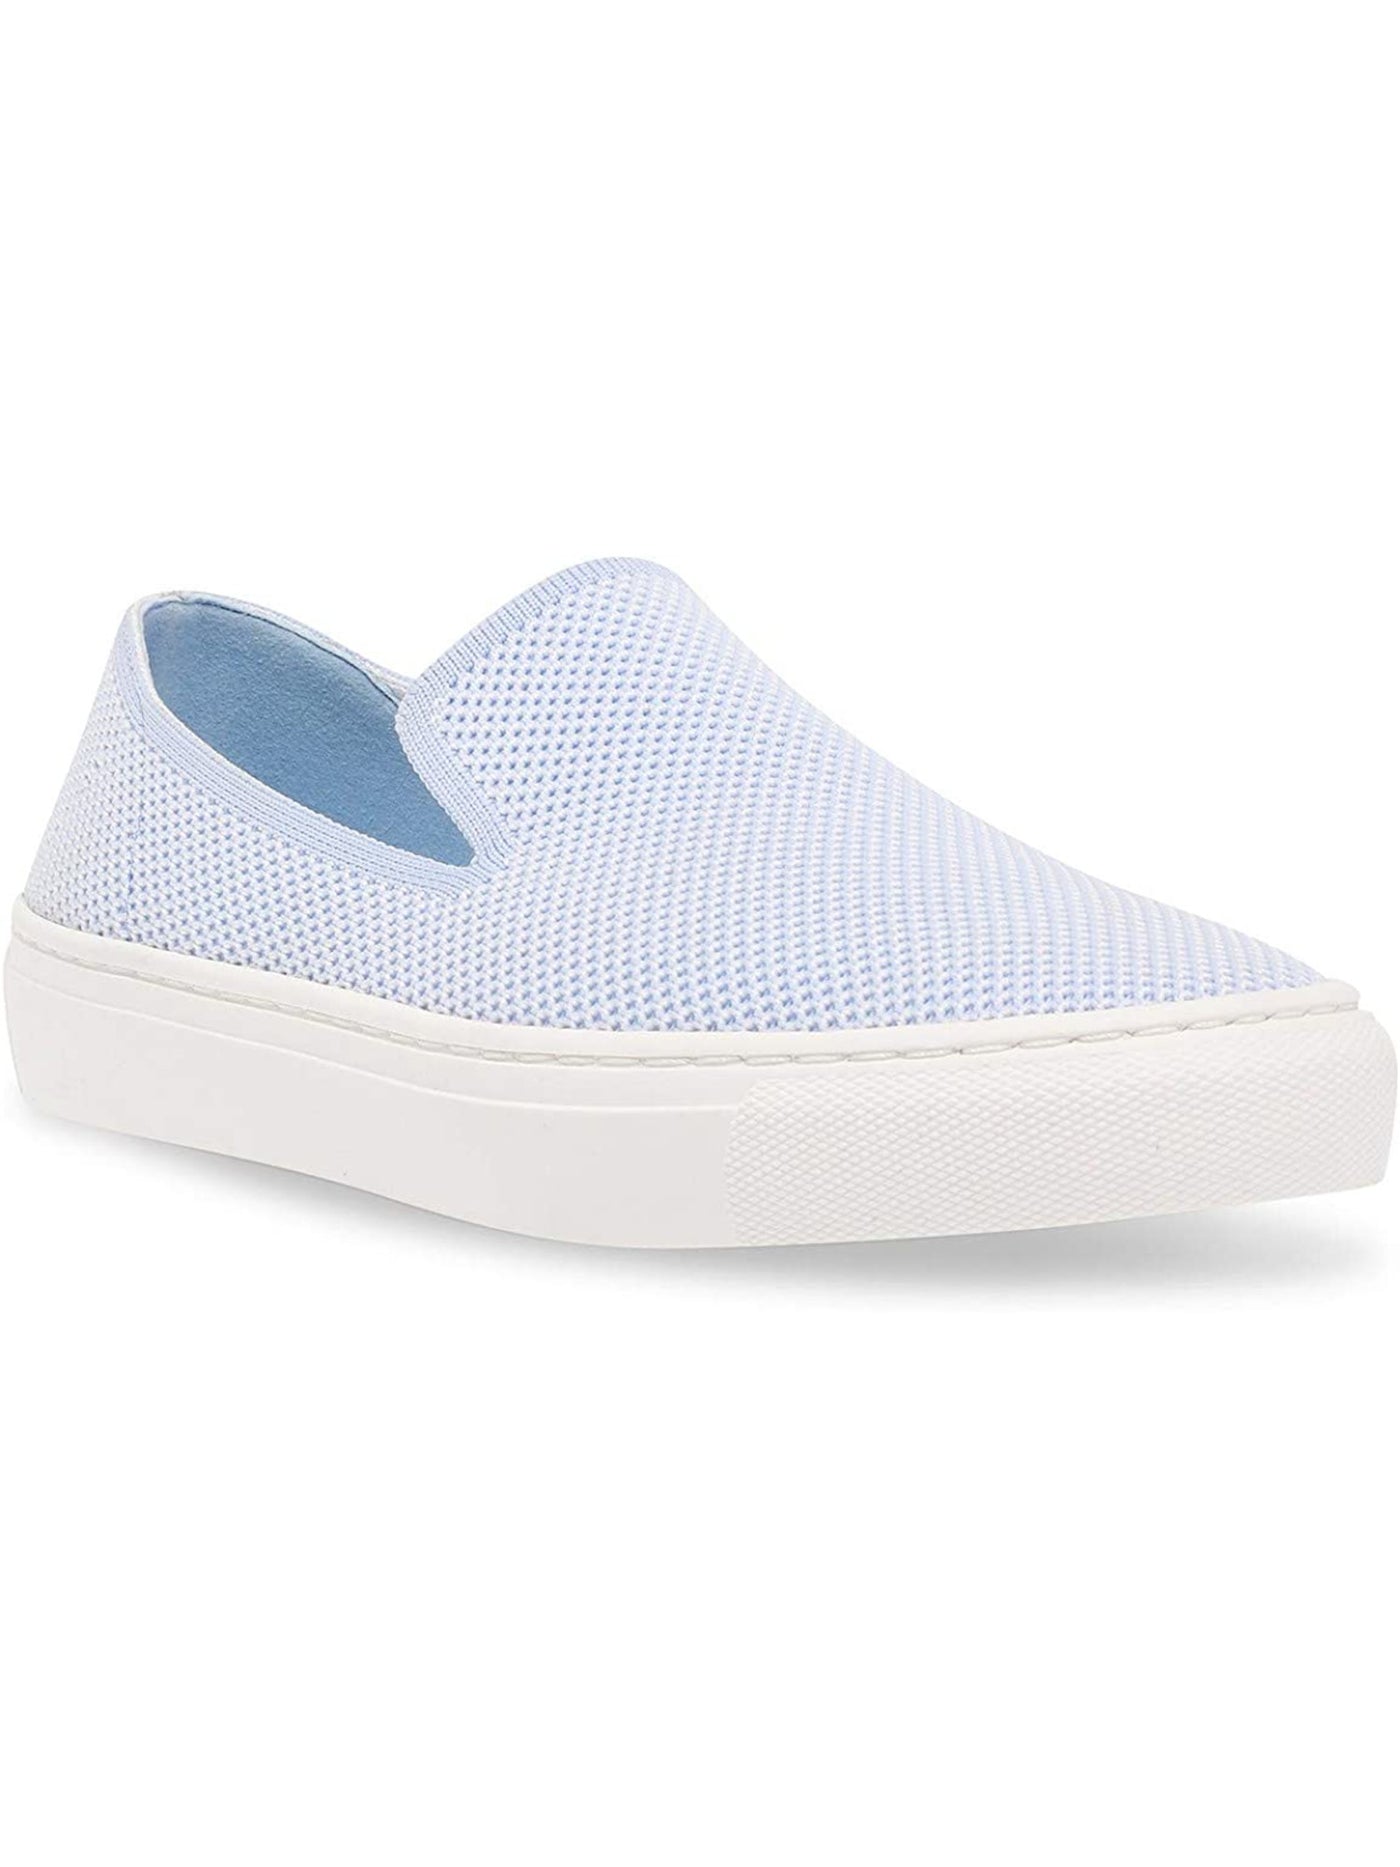 STEVEN NEW YORK Womens Light Blue Removable Insole Knit Cushioned Kraft Round Toe Platform Slip On Athletic Sneakers Shoes 9.5 M